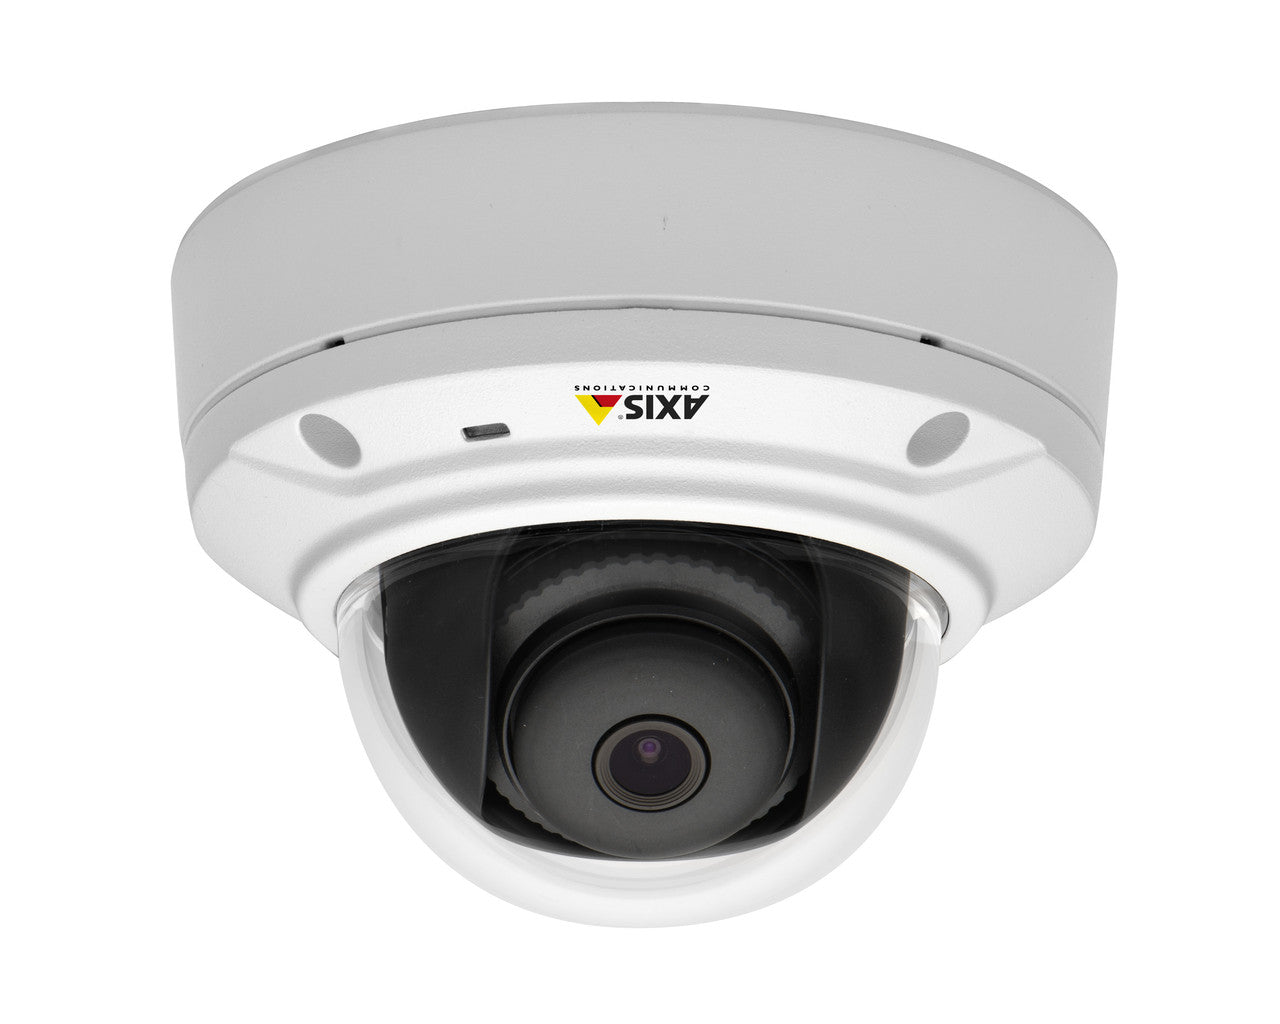 AXIS M3025-VE (0536-001) 2MP Fixed Dome Network Camera